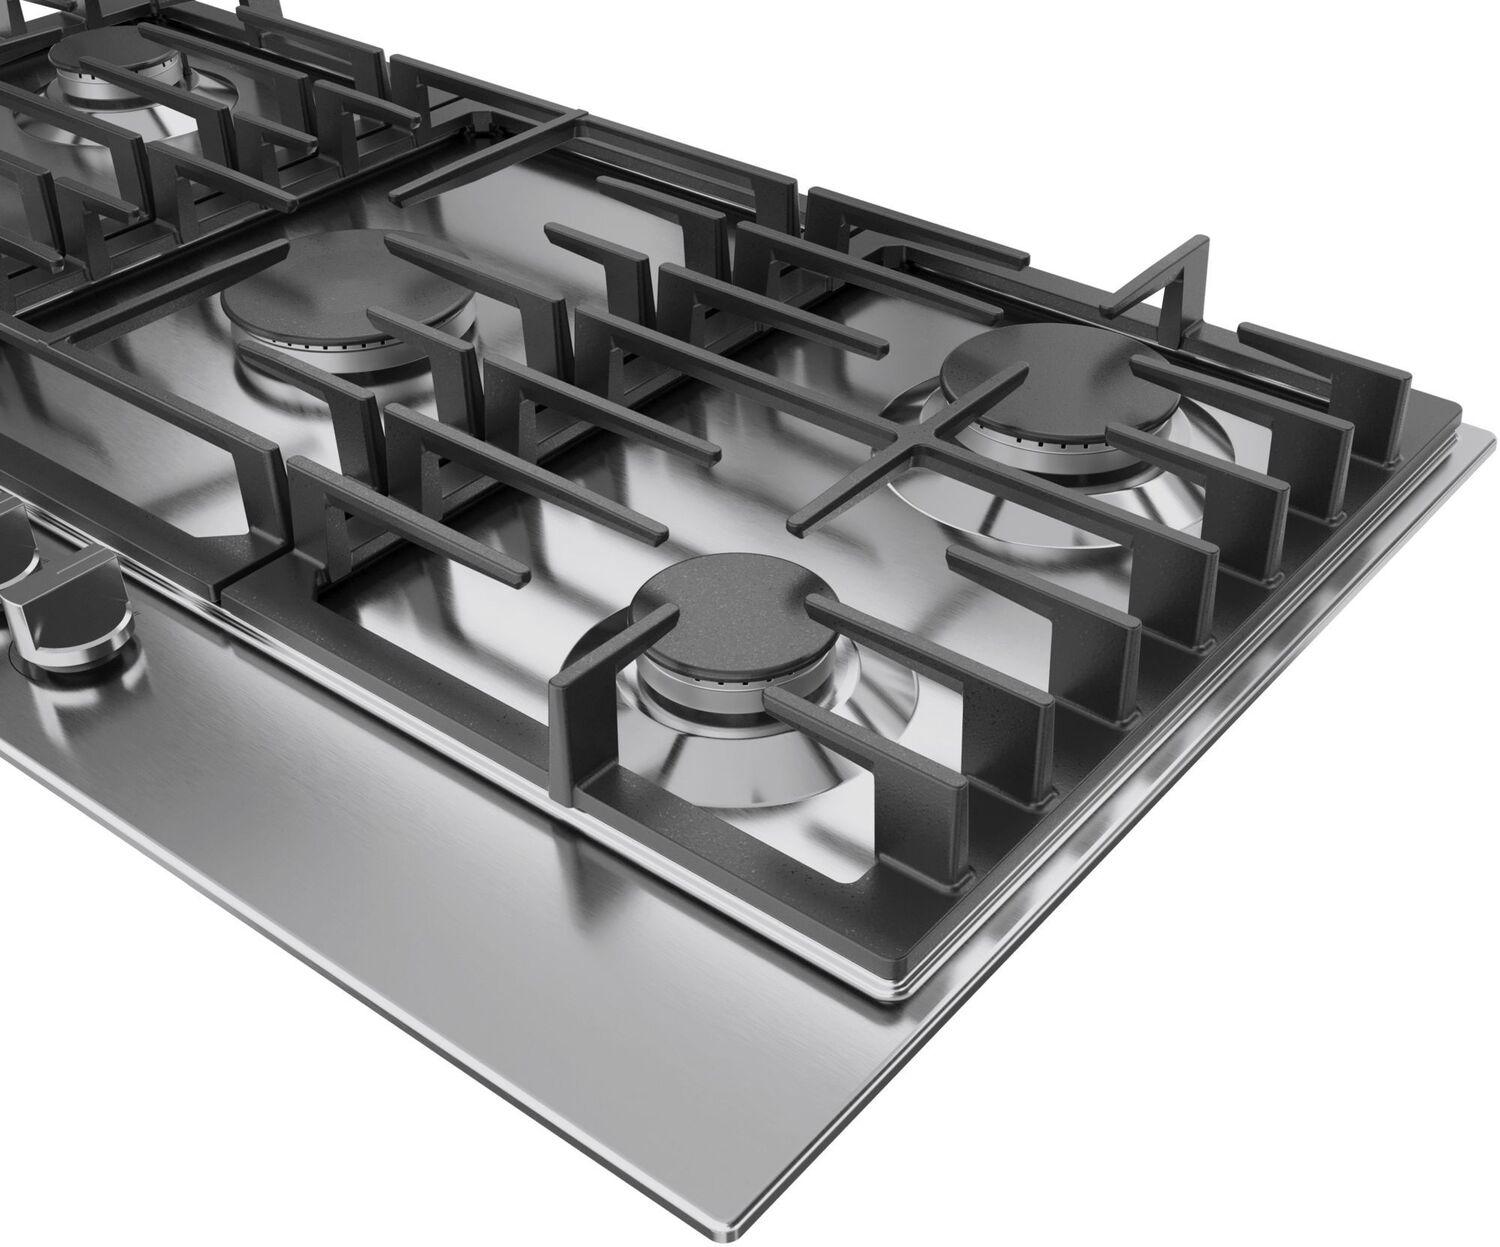 Bosch 300 Series Gas Cooktop 36" Stainless steel NGM3650UC